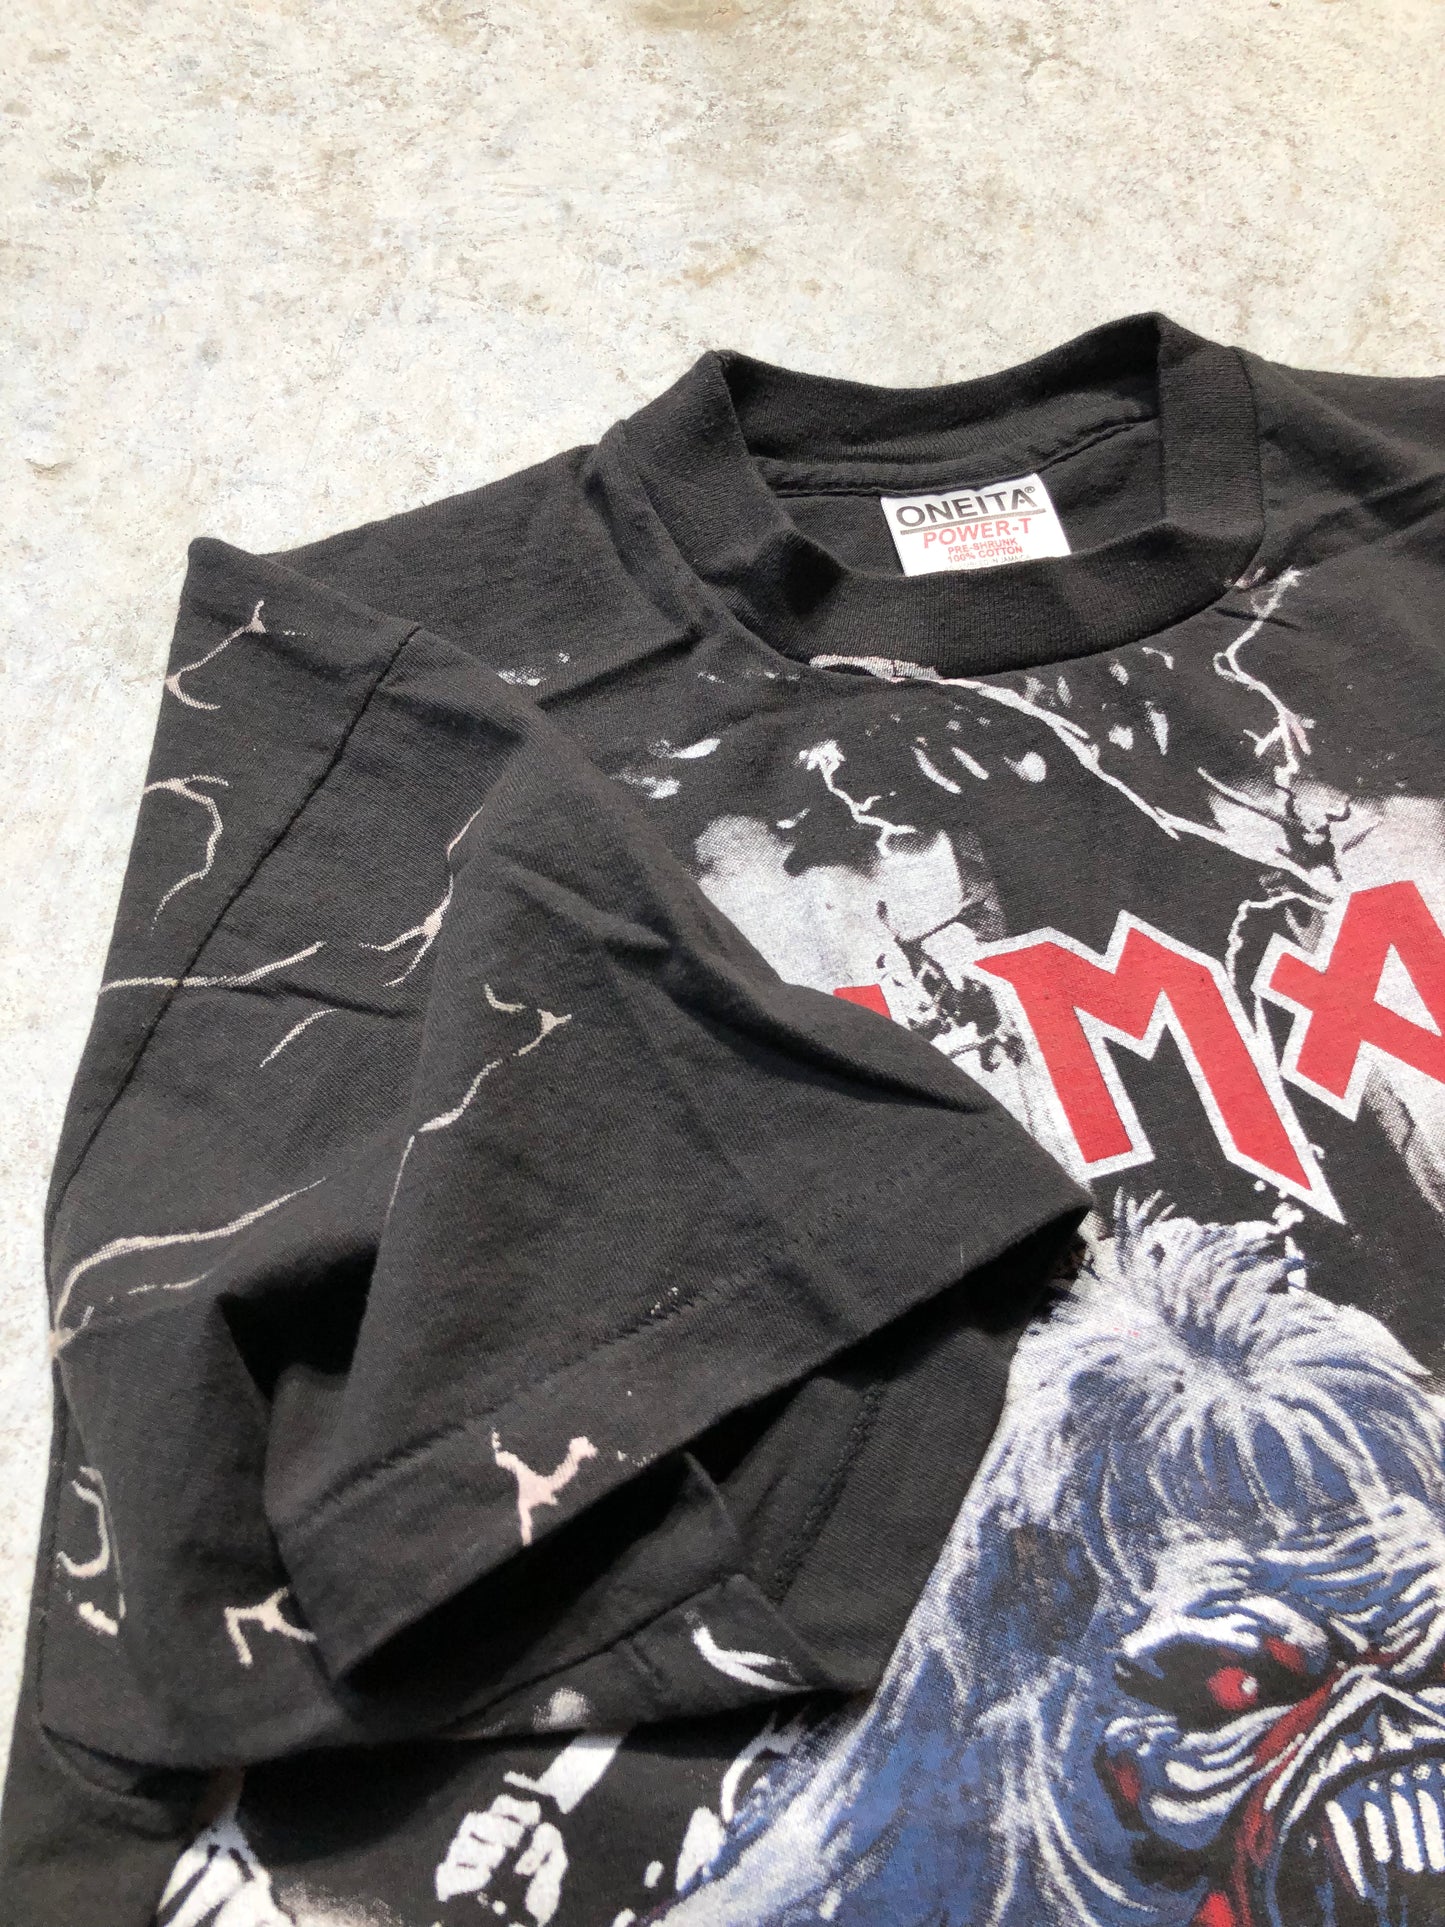 Iron Maiden All Over Print Tee (Large), Tee - Vintage64.com